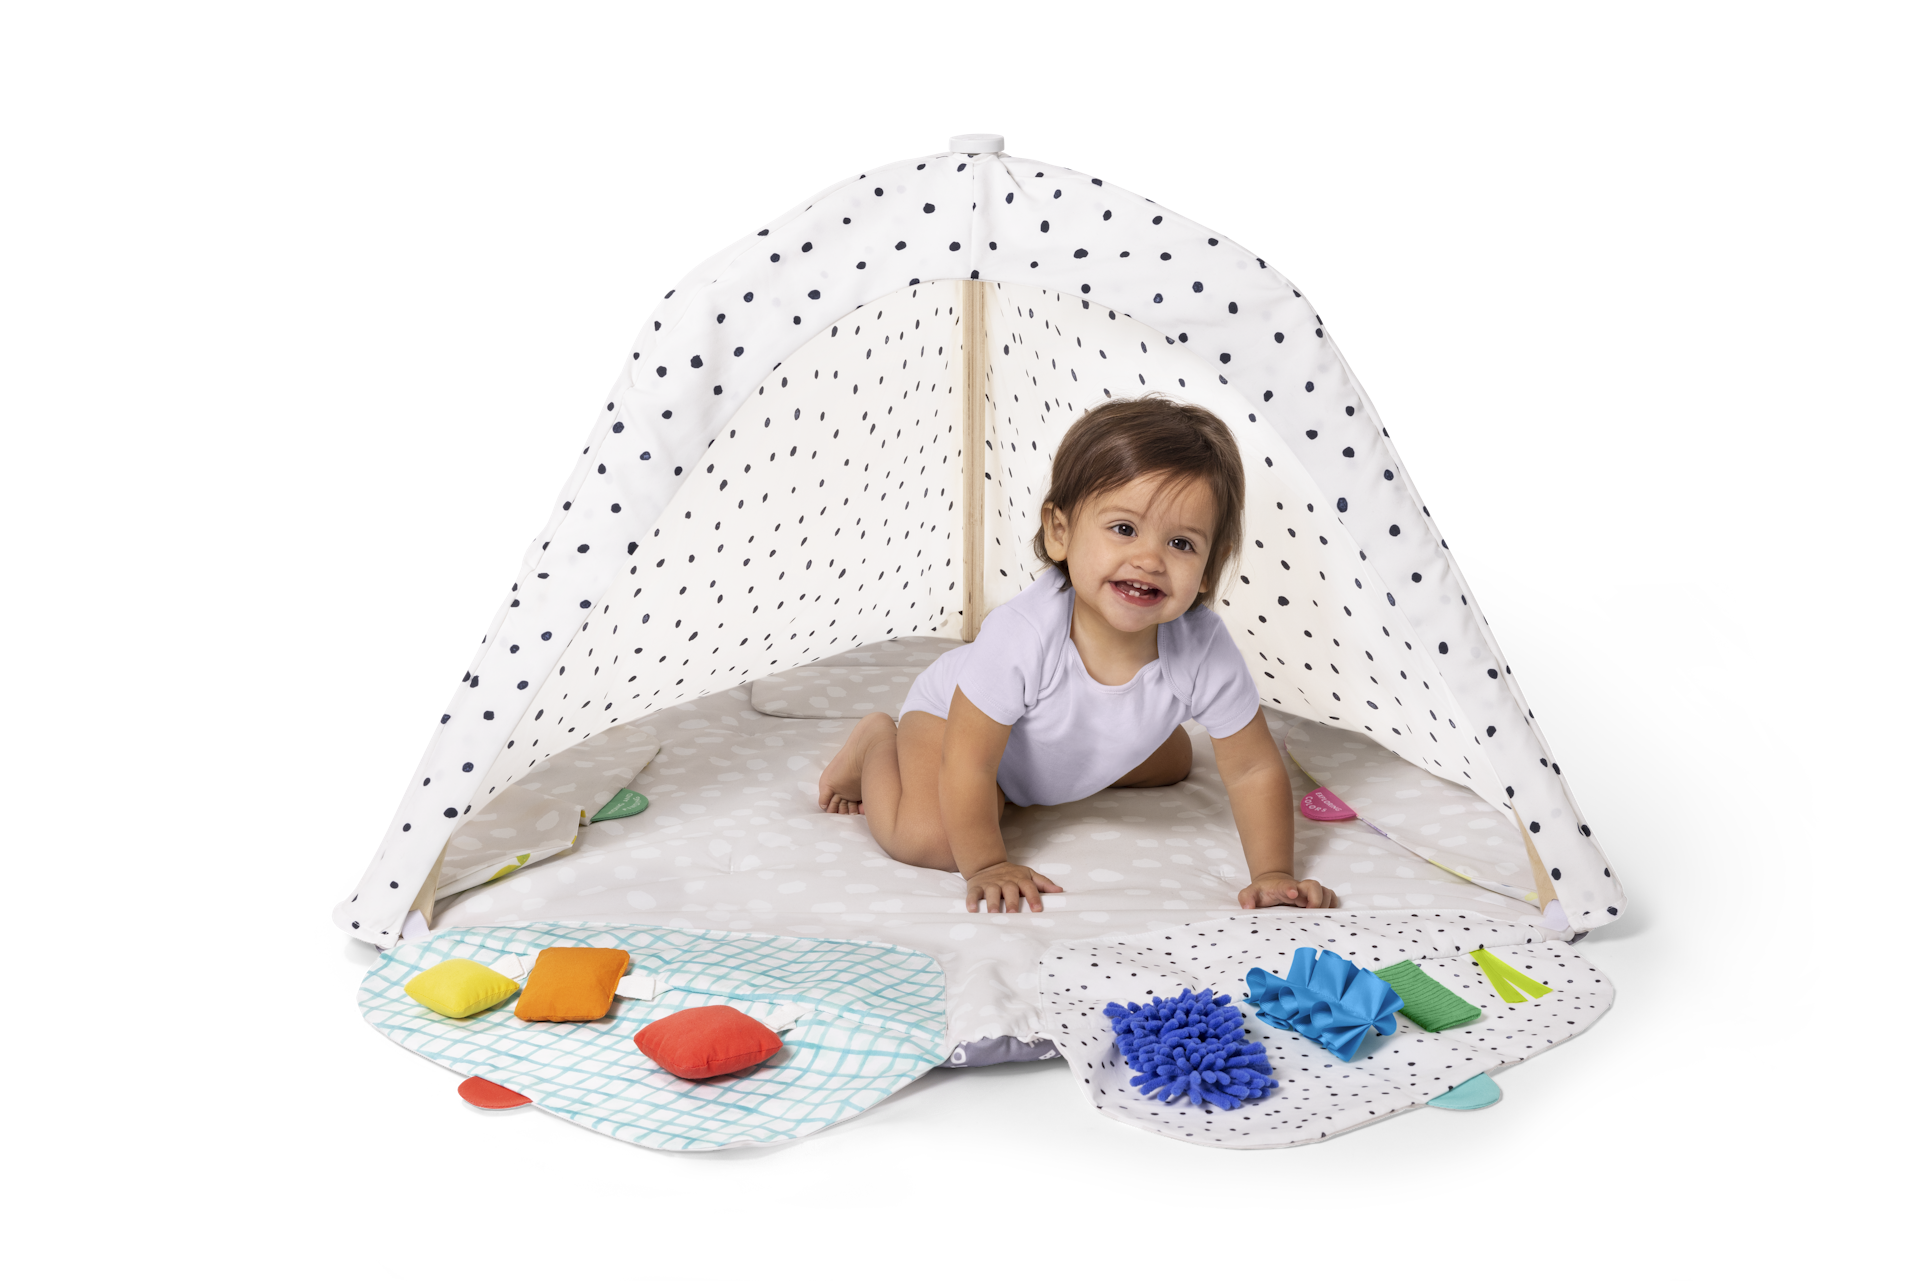 Baby Play Gym – The ONLY Baby Play Gym that can be used SAFELY in